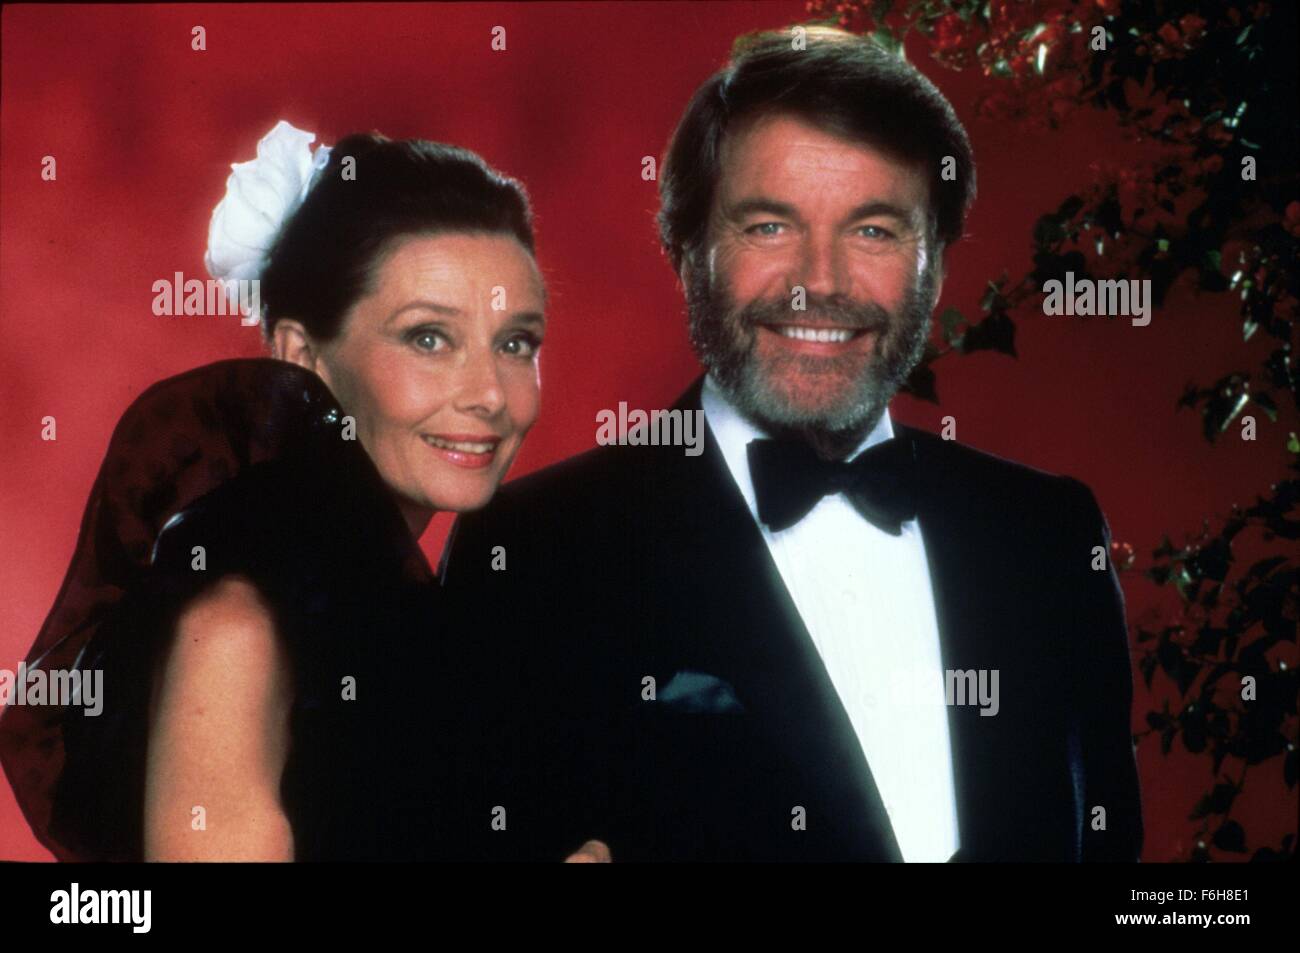 1987, Film Title: LOVE AMONG THIEVES, Director: ROGER YOUNG, Pictured: AUDREY HEPBURN, ROBERT WAGNER, TUXEDO, ARM IN ARM, BEARD, ROMANCE, WEALTHY. (Credit Image: SNAP) Stock Photo